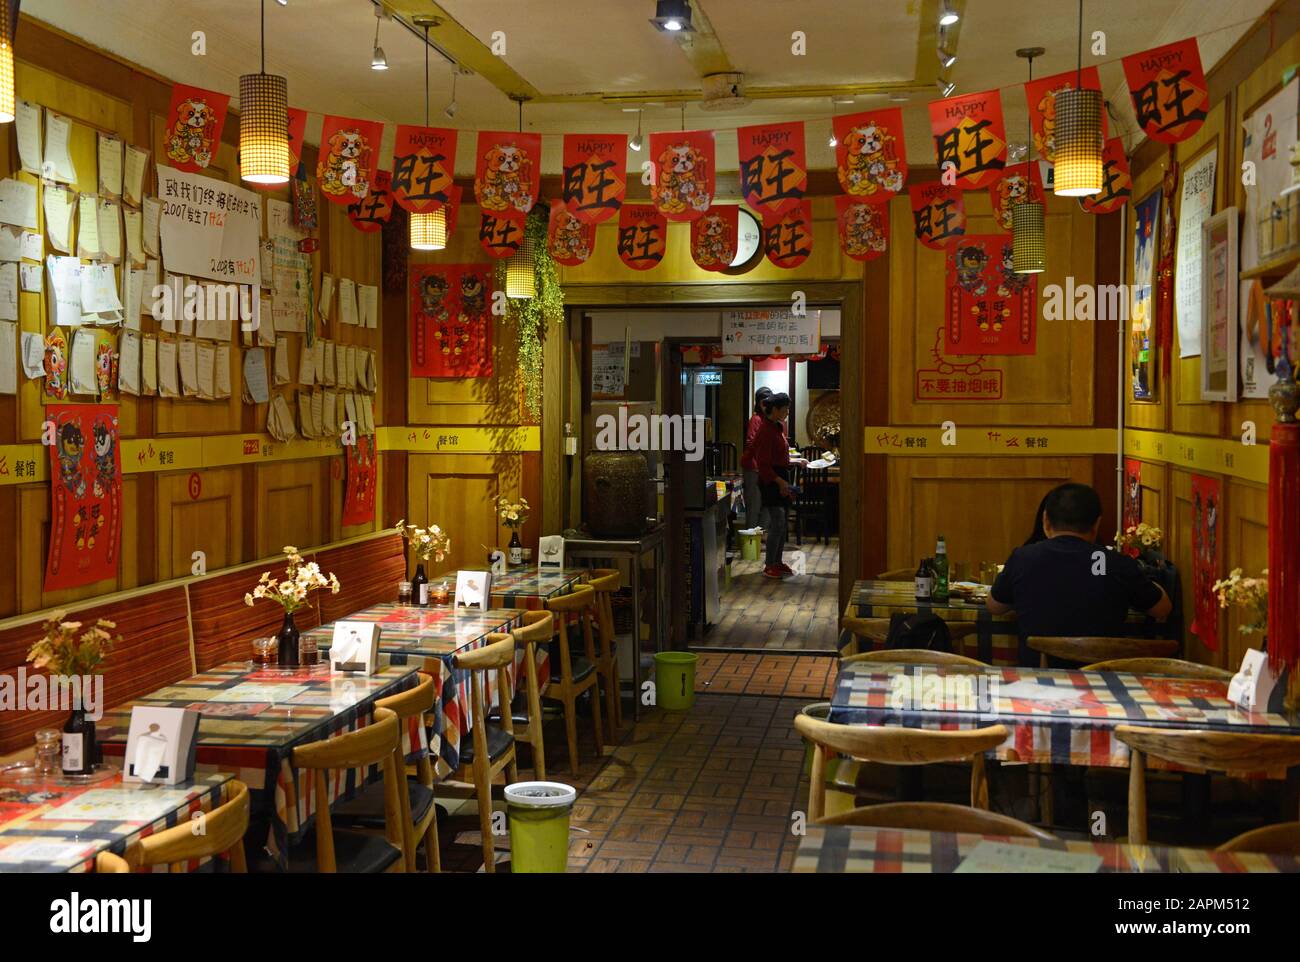 Interior of a restaurant in Qingdao, Shandong province, China late in the evening Stock Photo